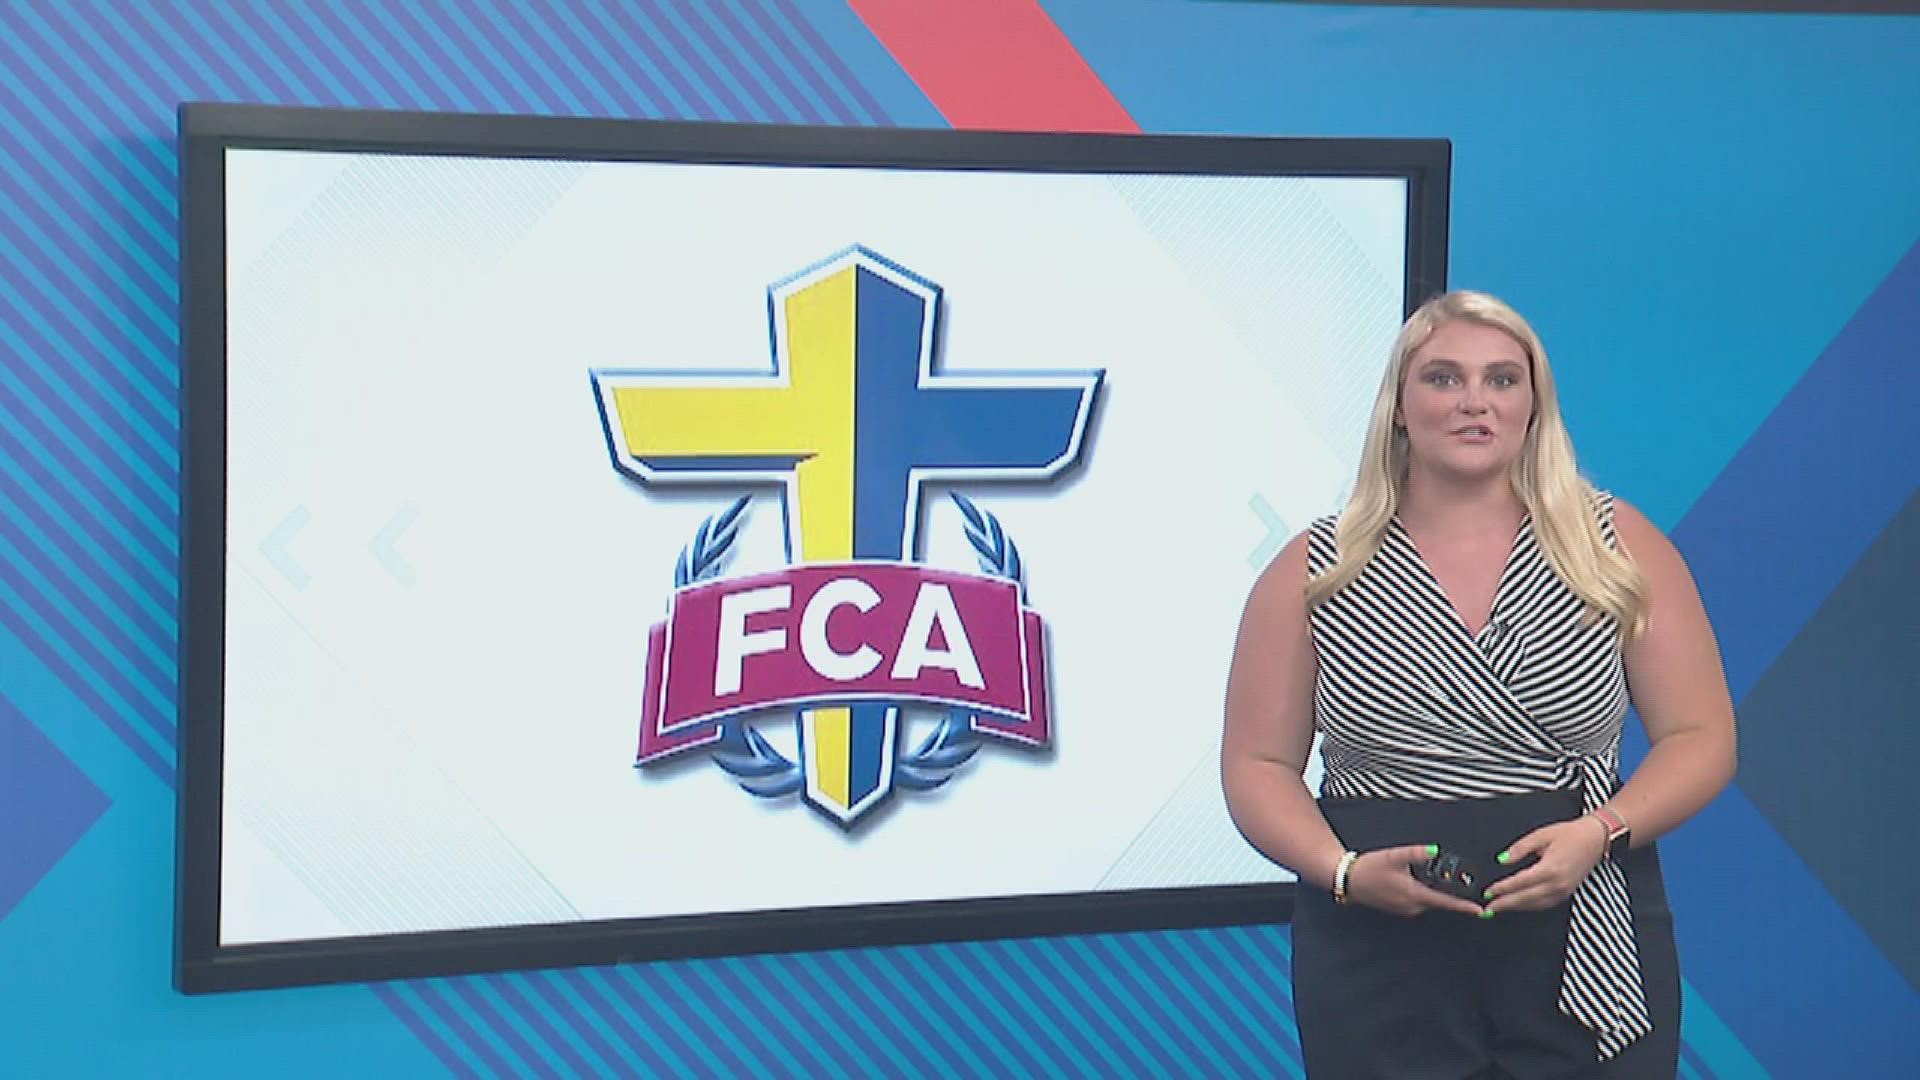 FCA Story of the week, May 29, 2022